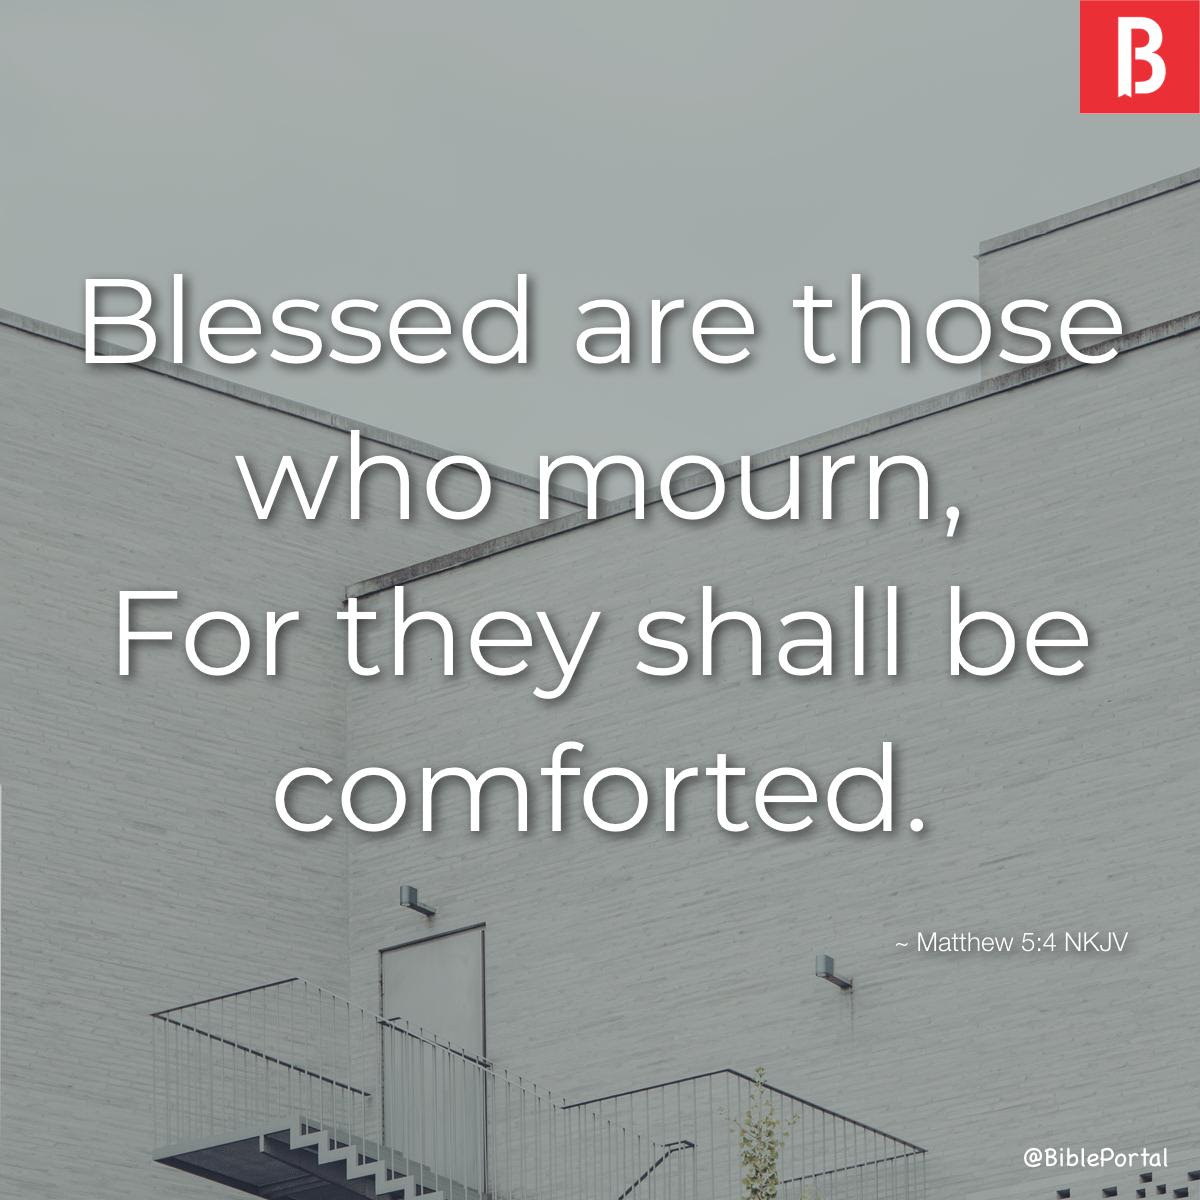   Blessed are those who mourn, For they shall be comforted. 